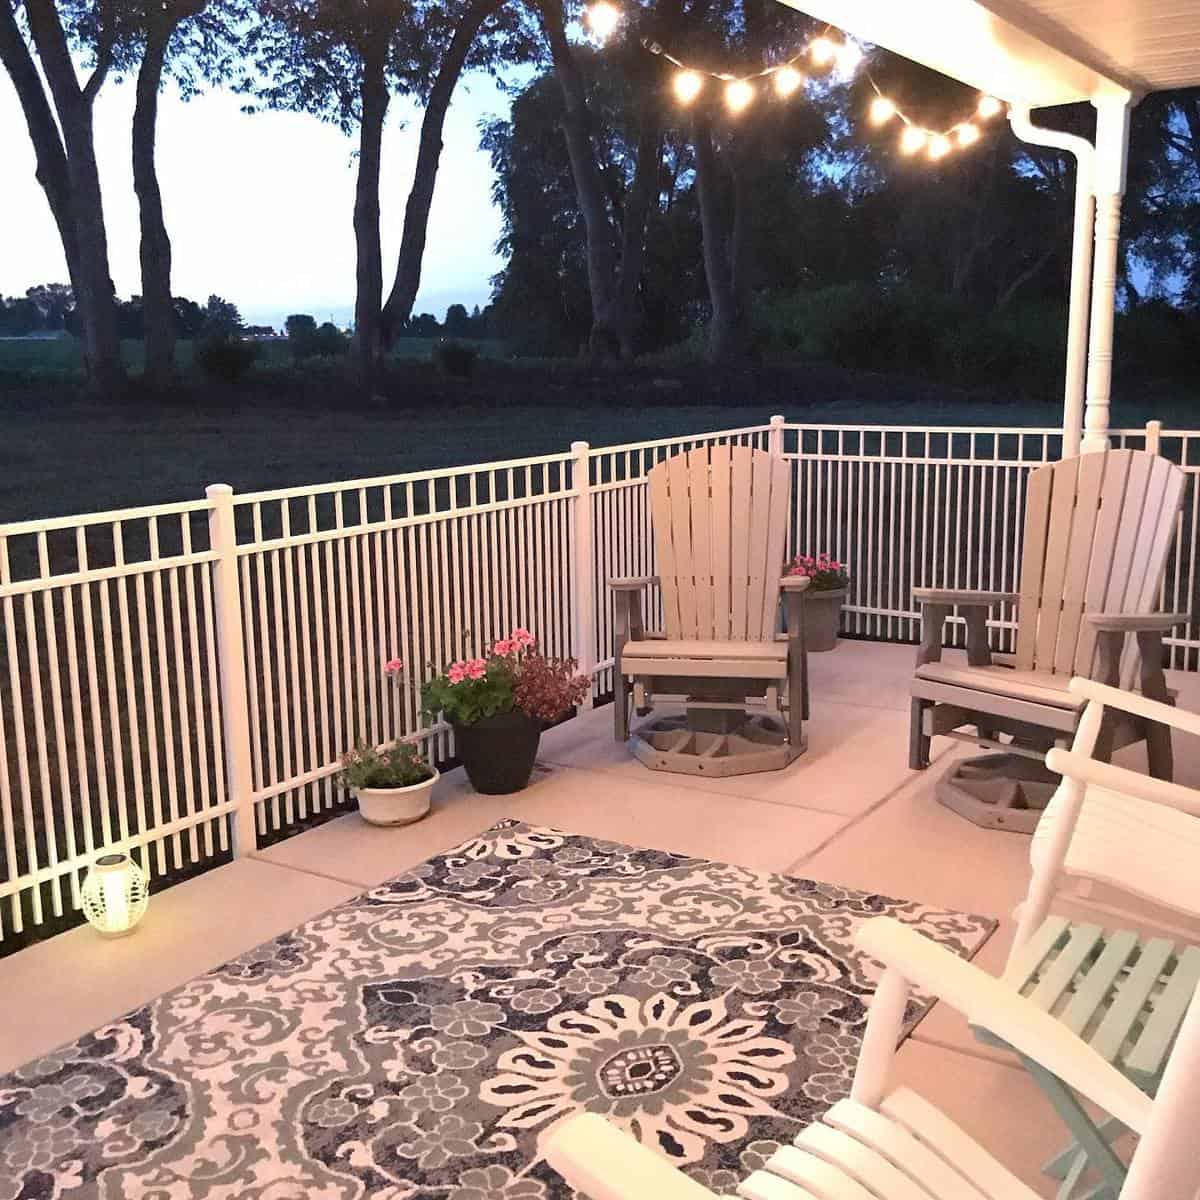 Slate deck carpet with white furniture pattern